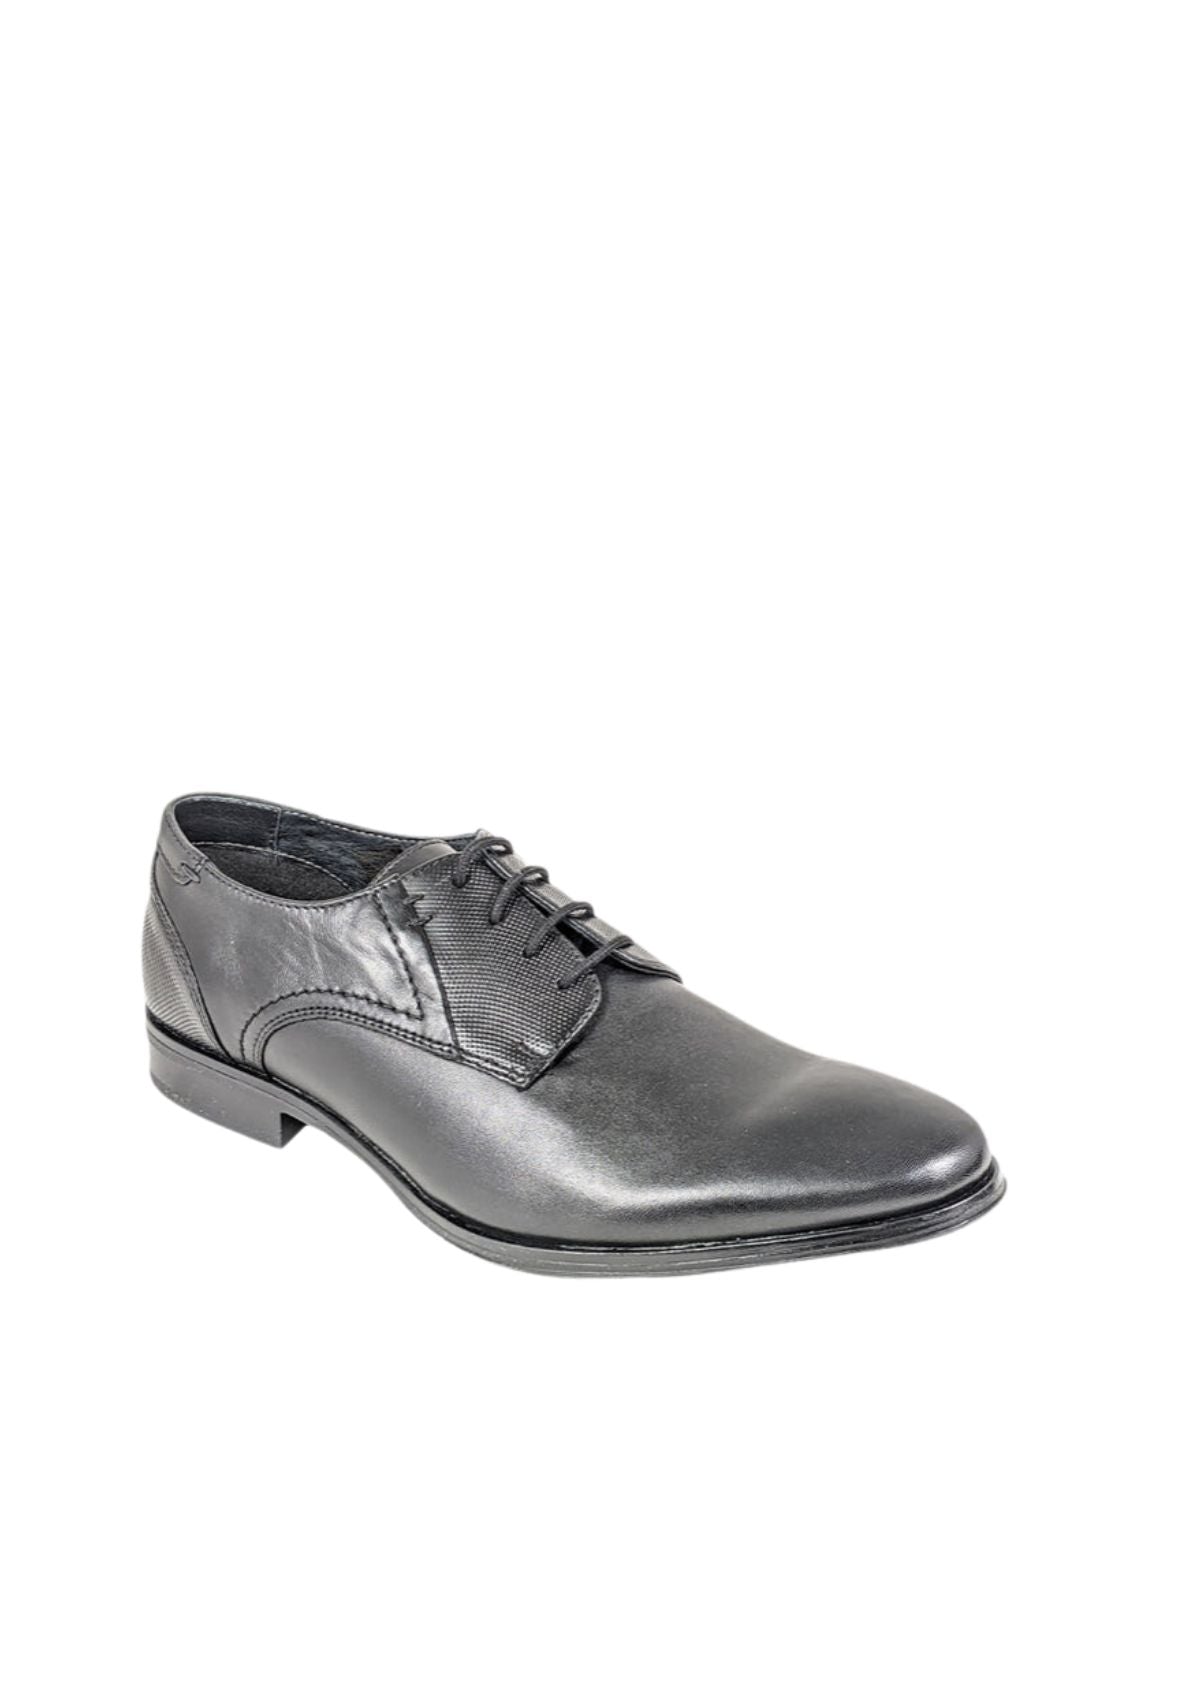 Dubarry Laced School Shoes Drago